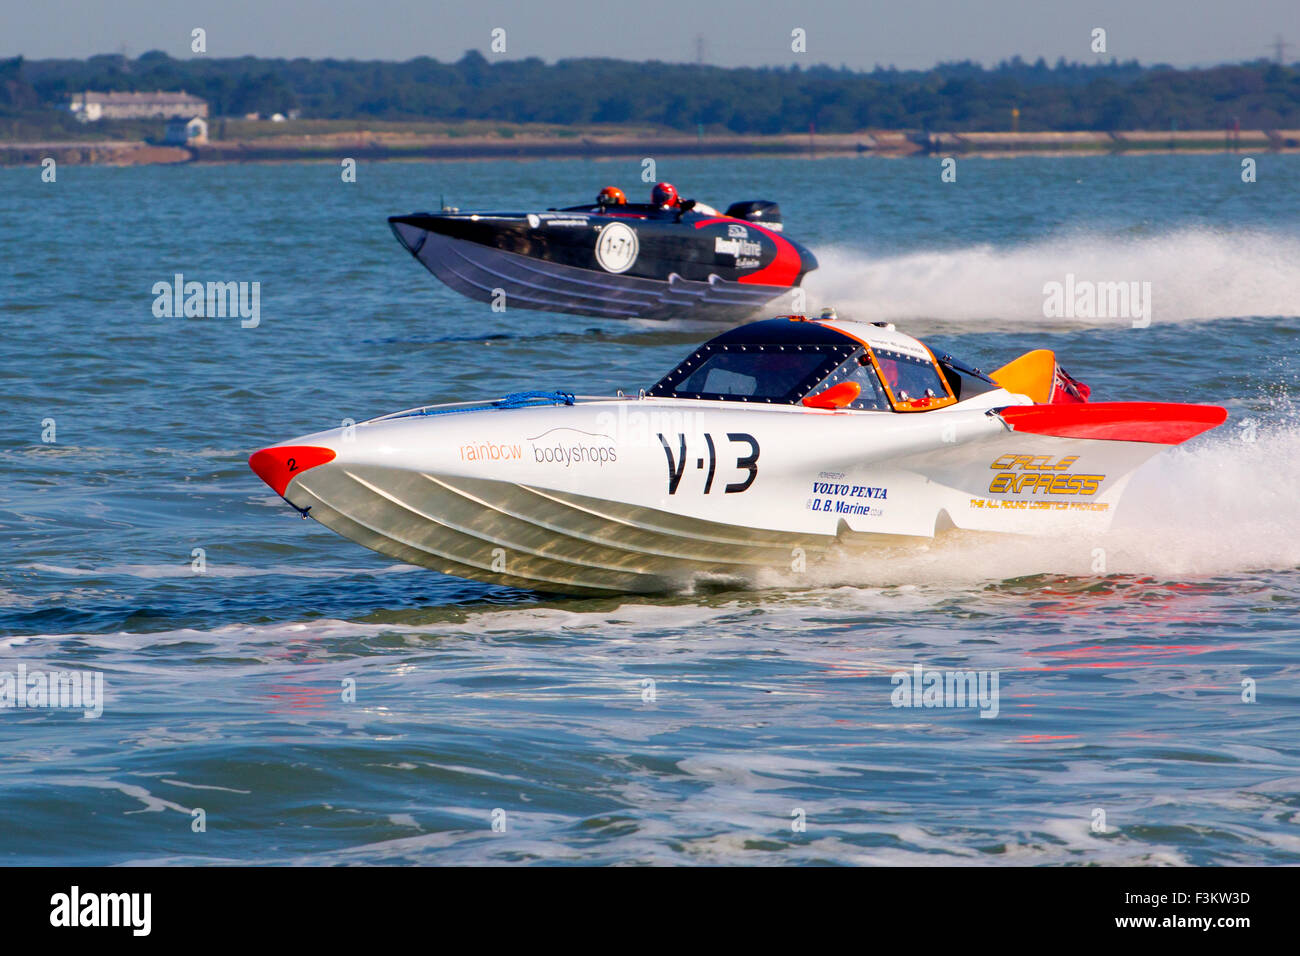 boats The Solent 2015, Cowes Classic, Power Boat Race, Cowes, Isle of Wight, England, UK, Stock Photo